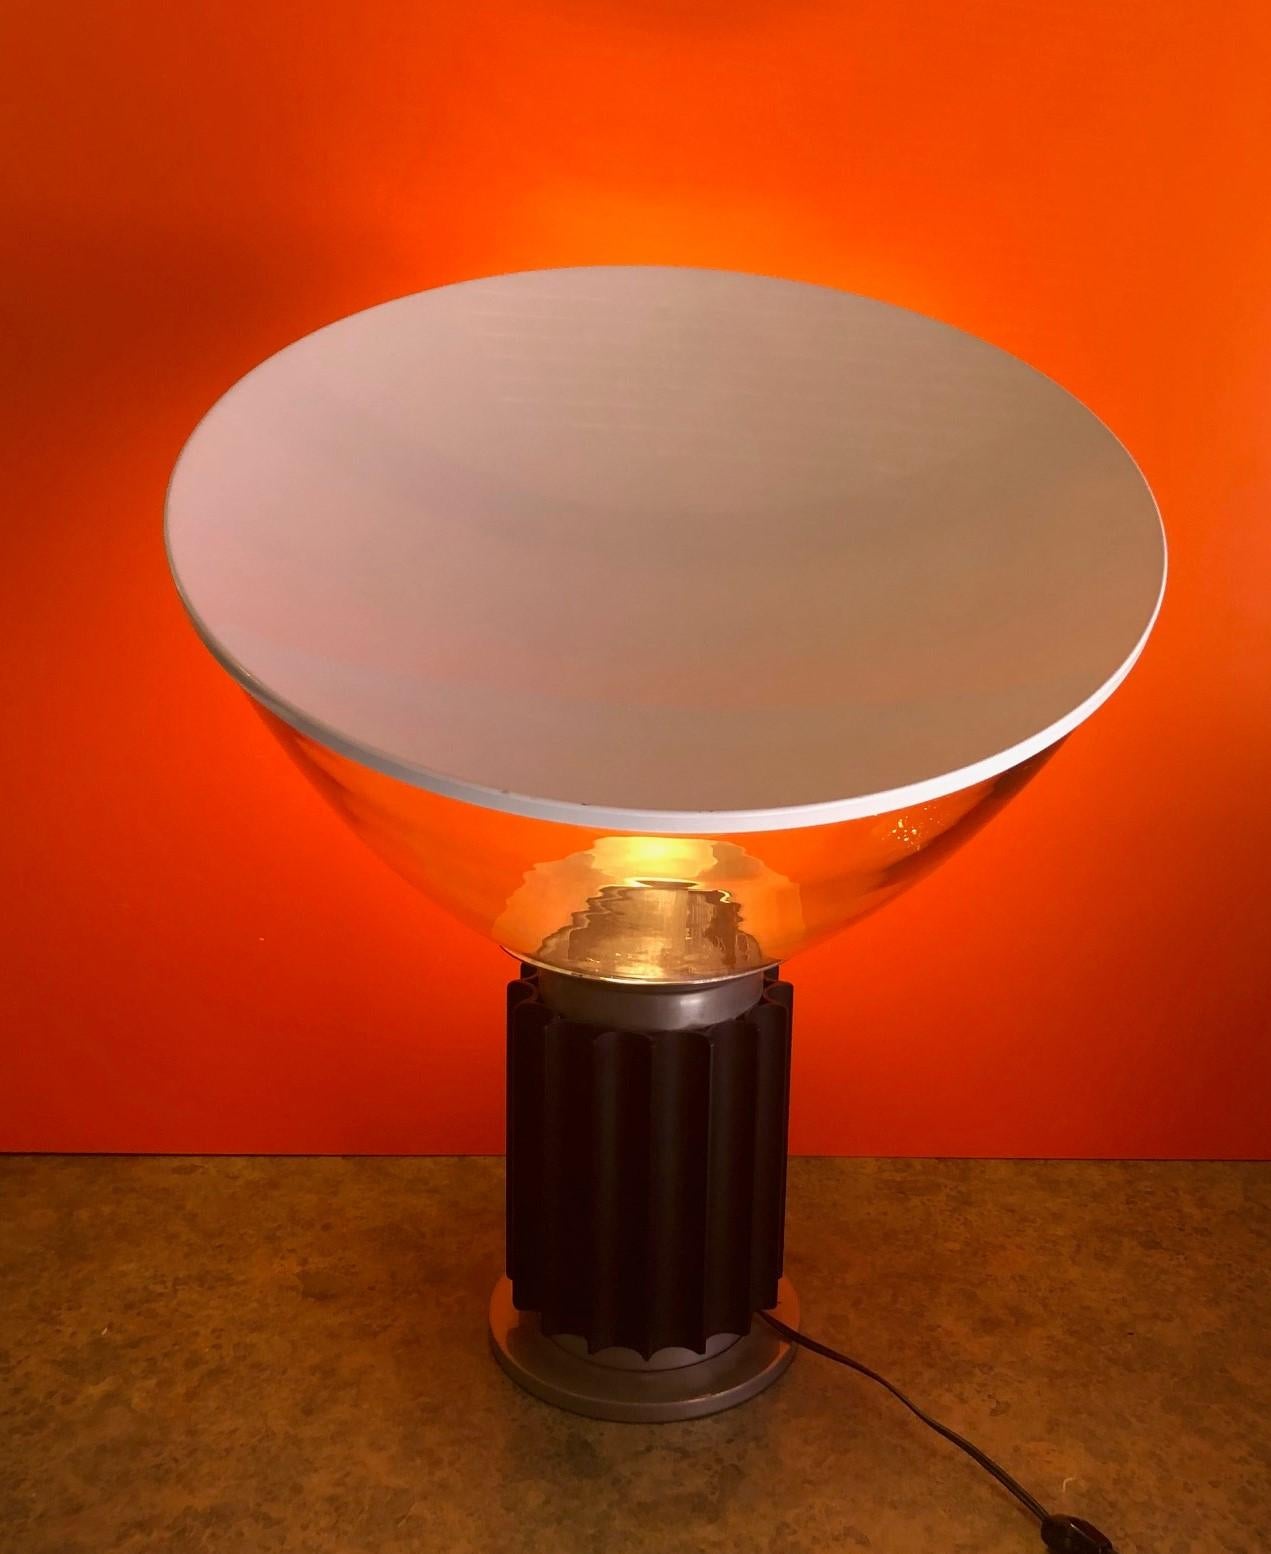 Mid-Century Modern Taccia Table Lamp Designed by Achille Castiglioni for Flos Early Production